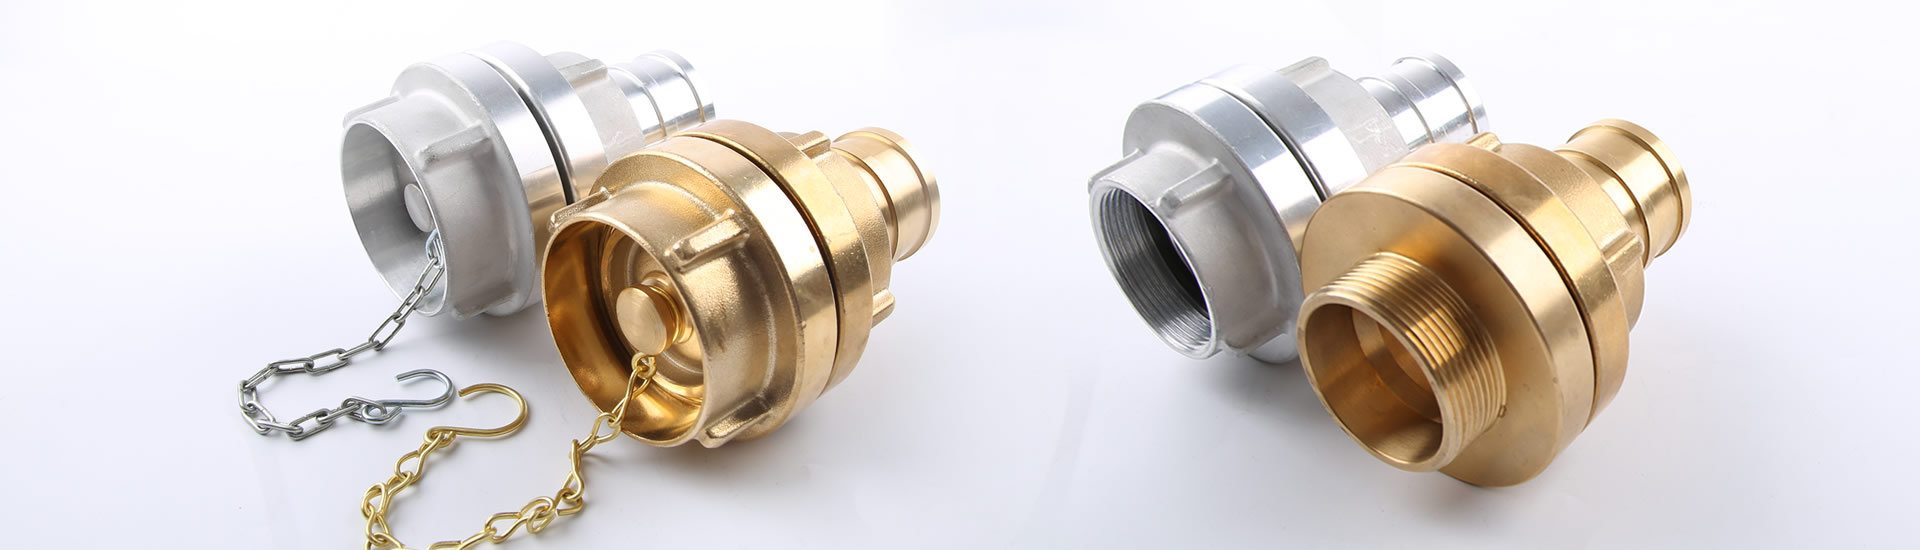 The picture shows four sets of storz couplings, which are two couplings join together in material of aluminum and brass.